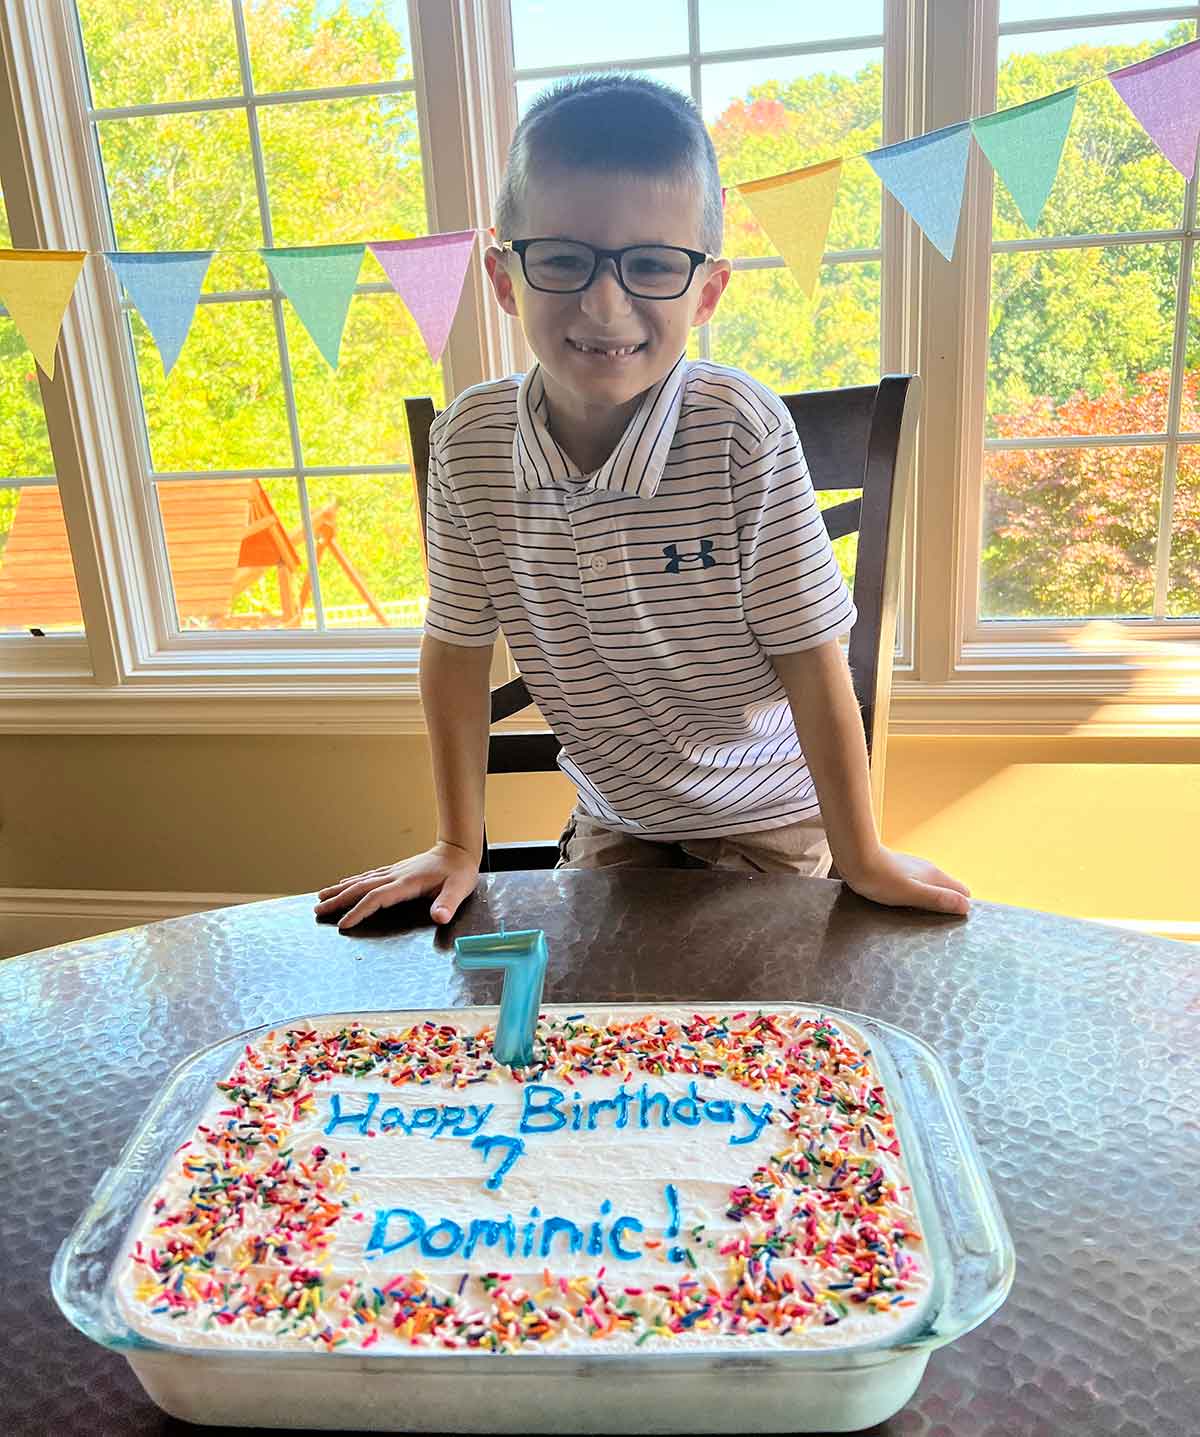 Little boy in a striped polo shirt smiling over a birthday cake with a number seven candle in it.